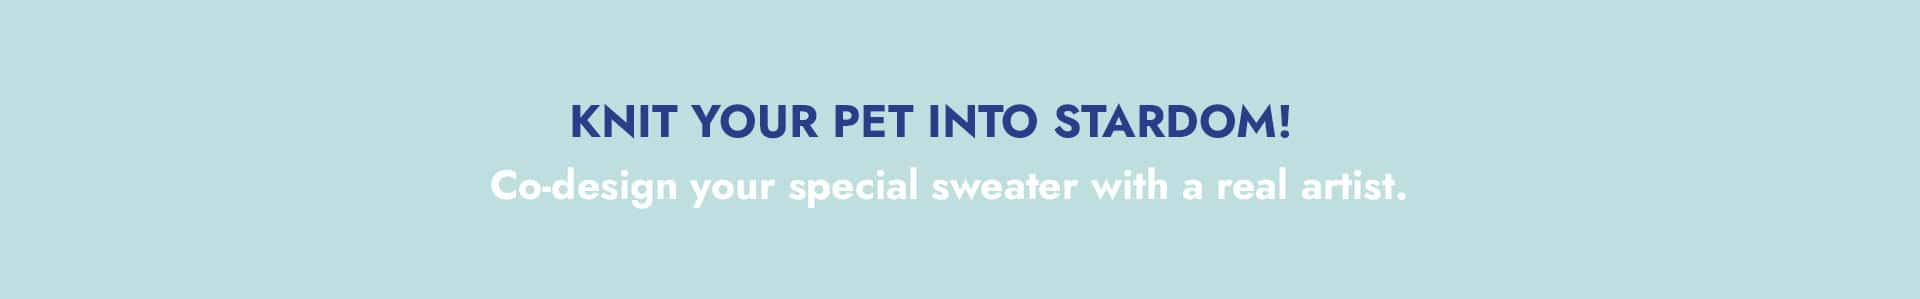 Knit your pet into stardom! Codesign your special sweater with real artist.